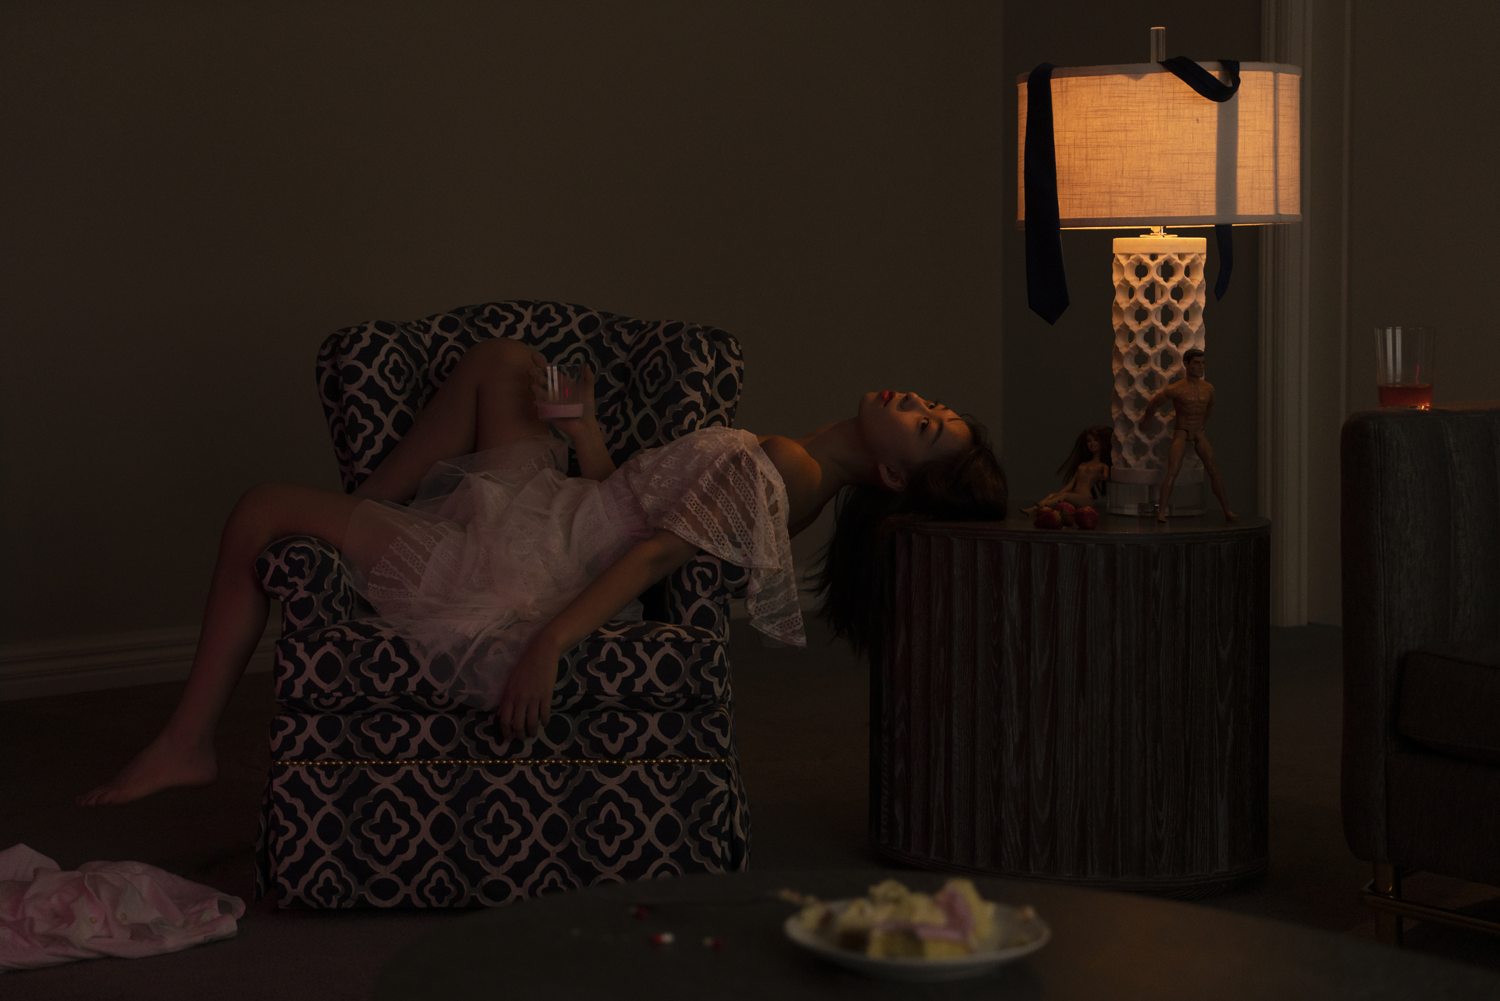 Digital photograph of woman in white dress lying across a small patterned lounge chair in dark lounge room.